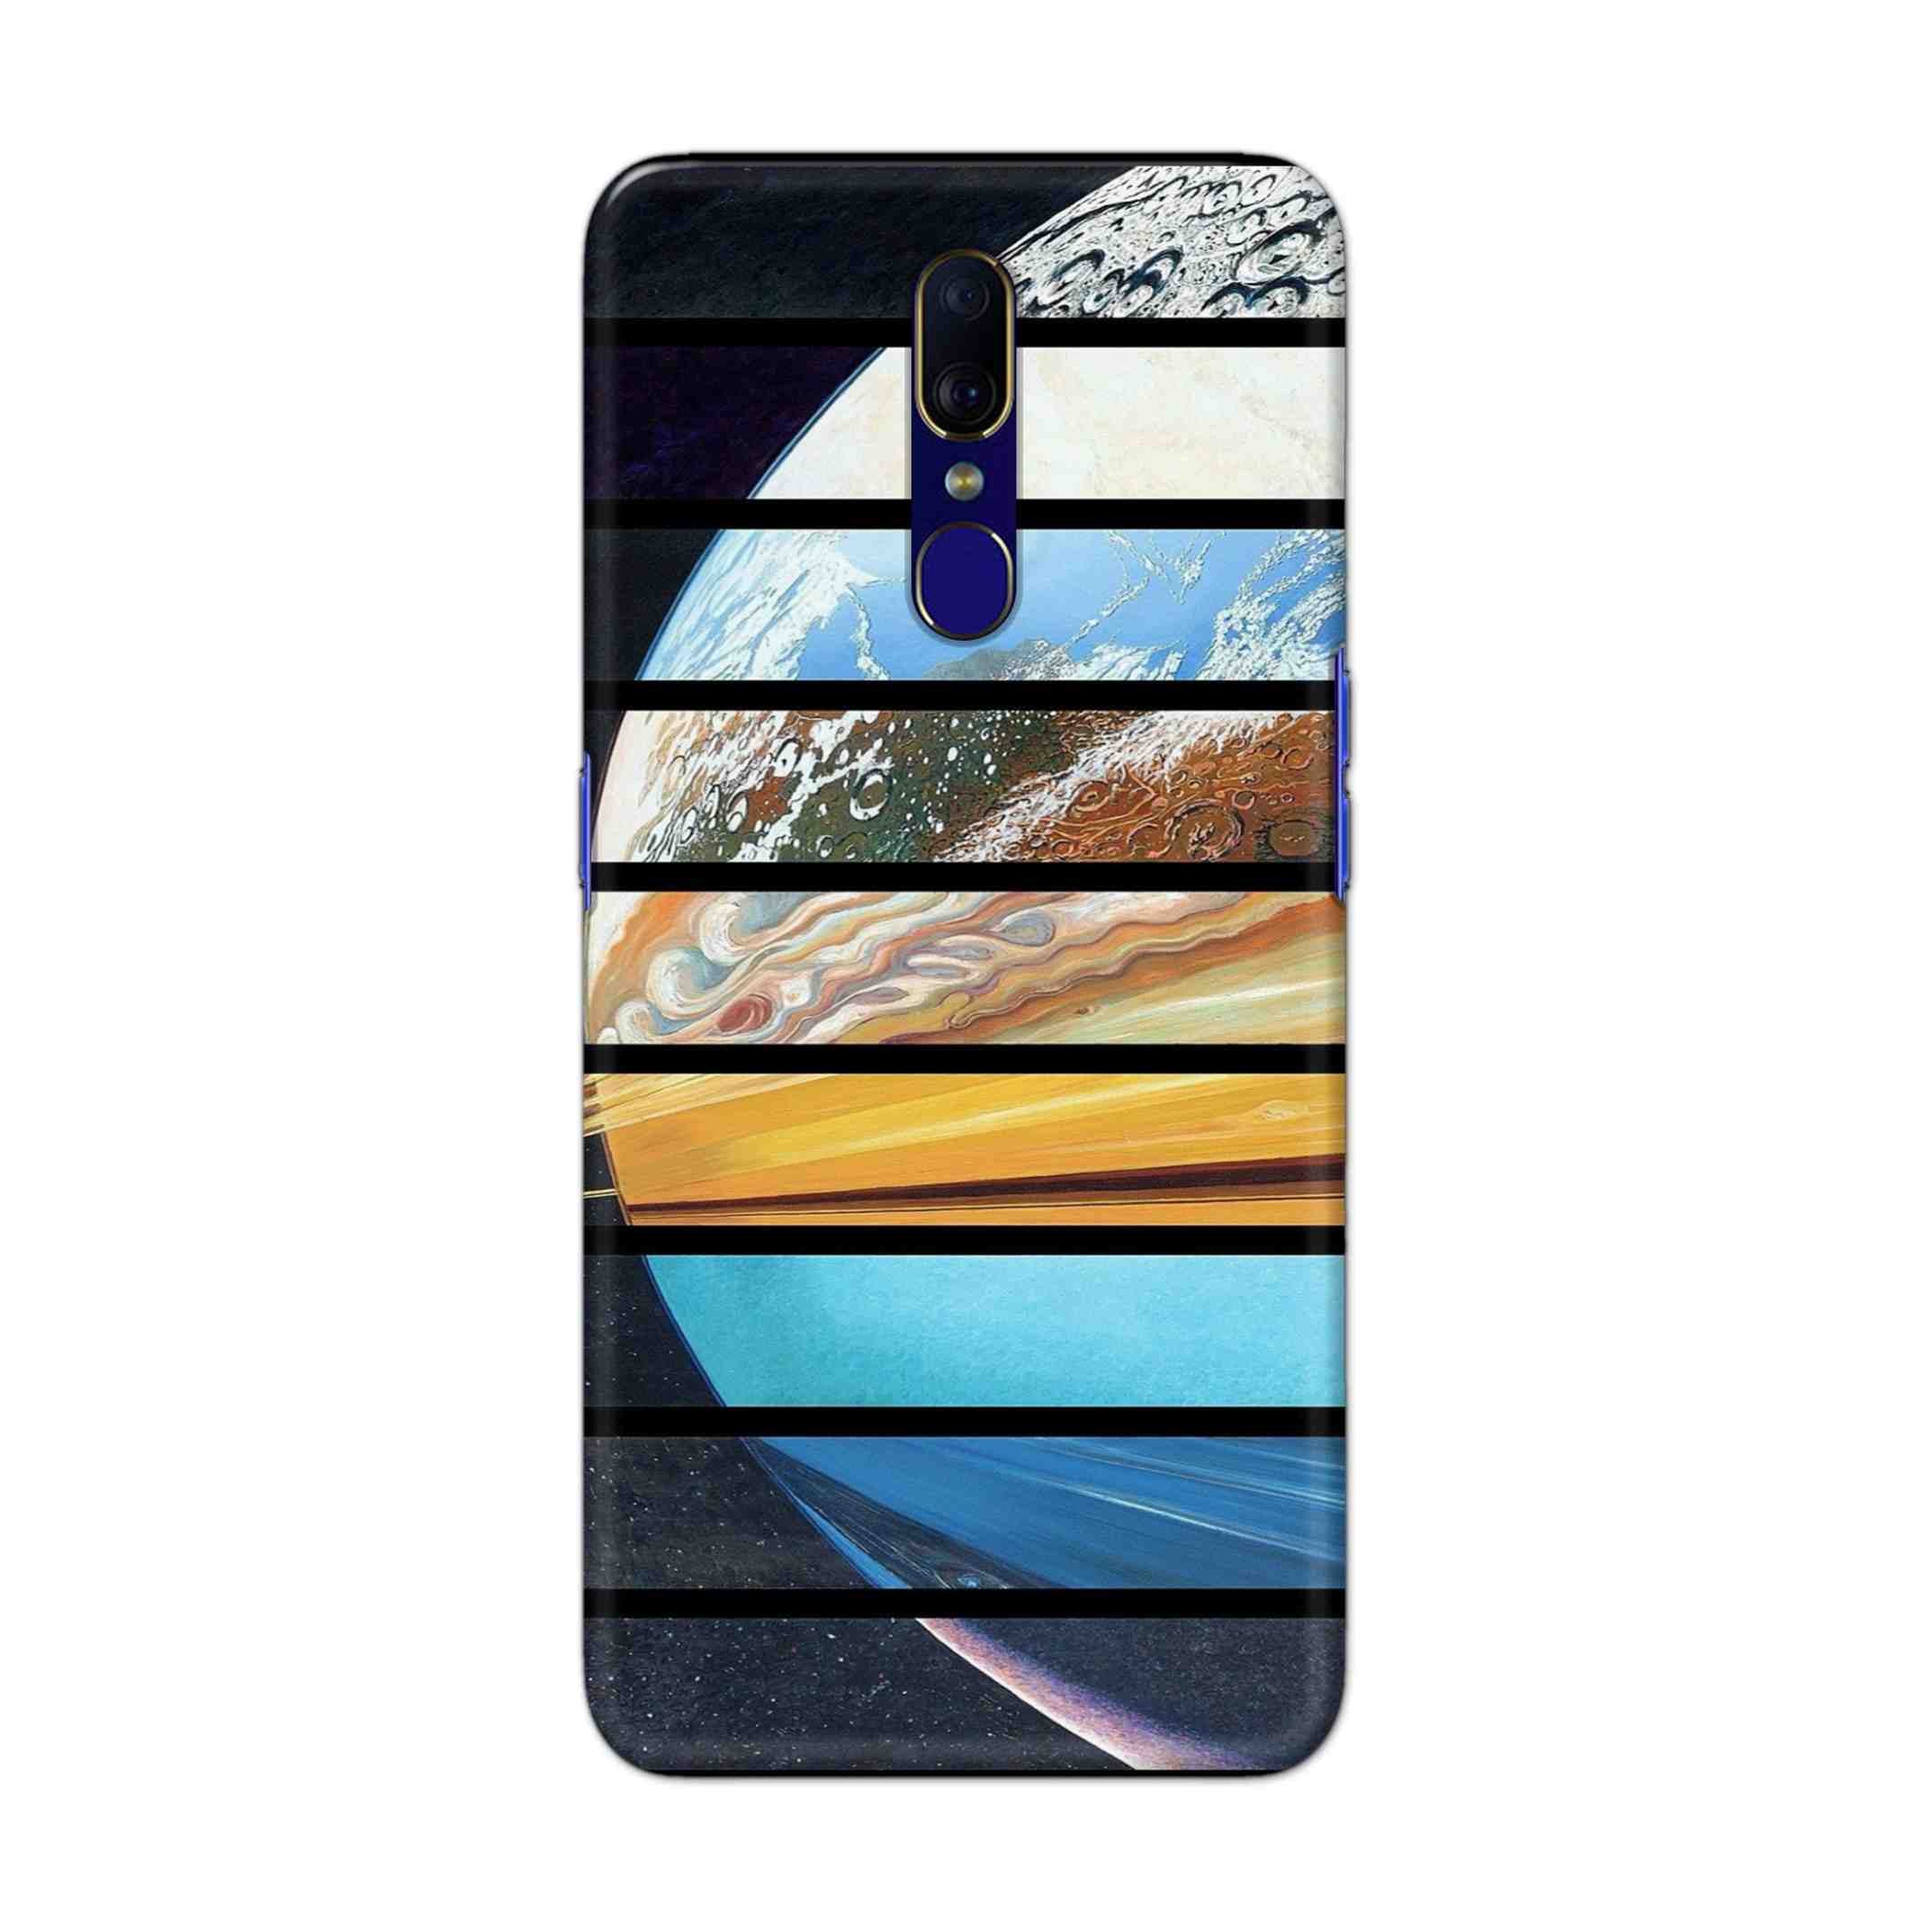 Buy Colourful Earth Hard Back Mobile Phone Case Cover For OPPO F11 Online